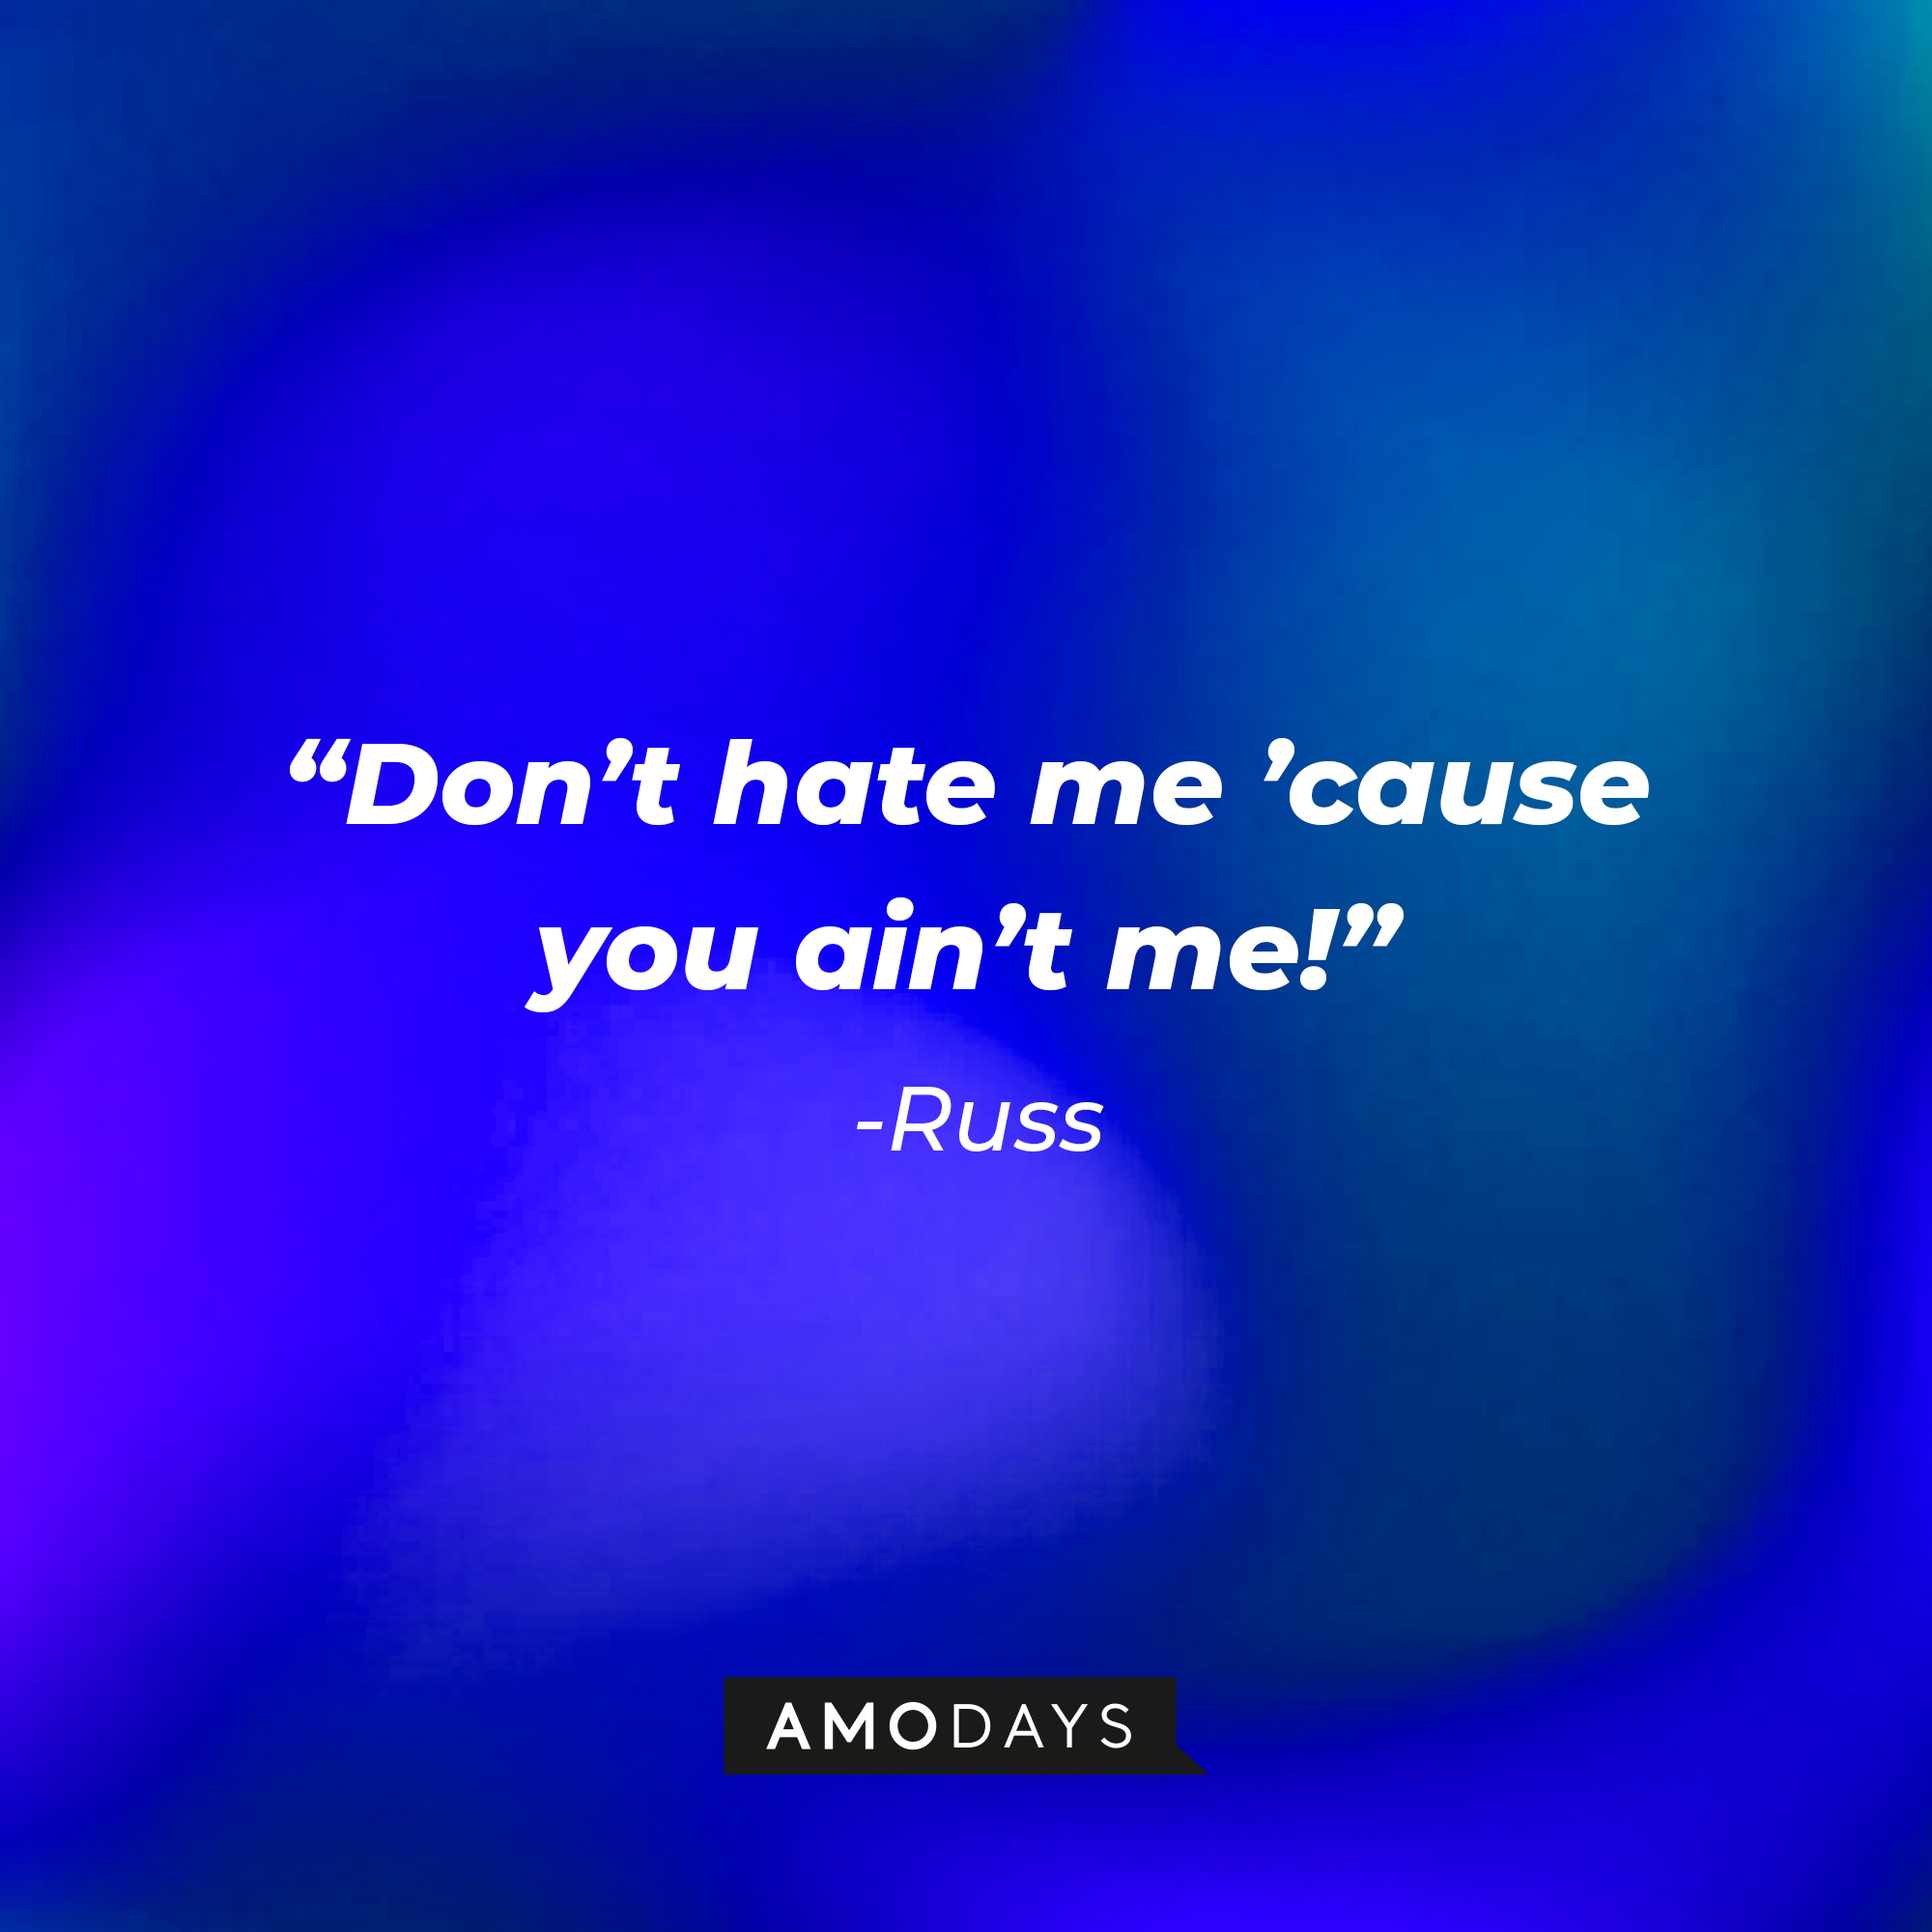 Russ’s quote: “Don’t hate me ’cause you ain’t me!”  | Source: AmoDays